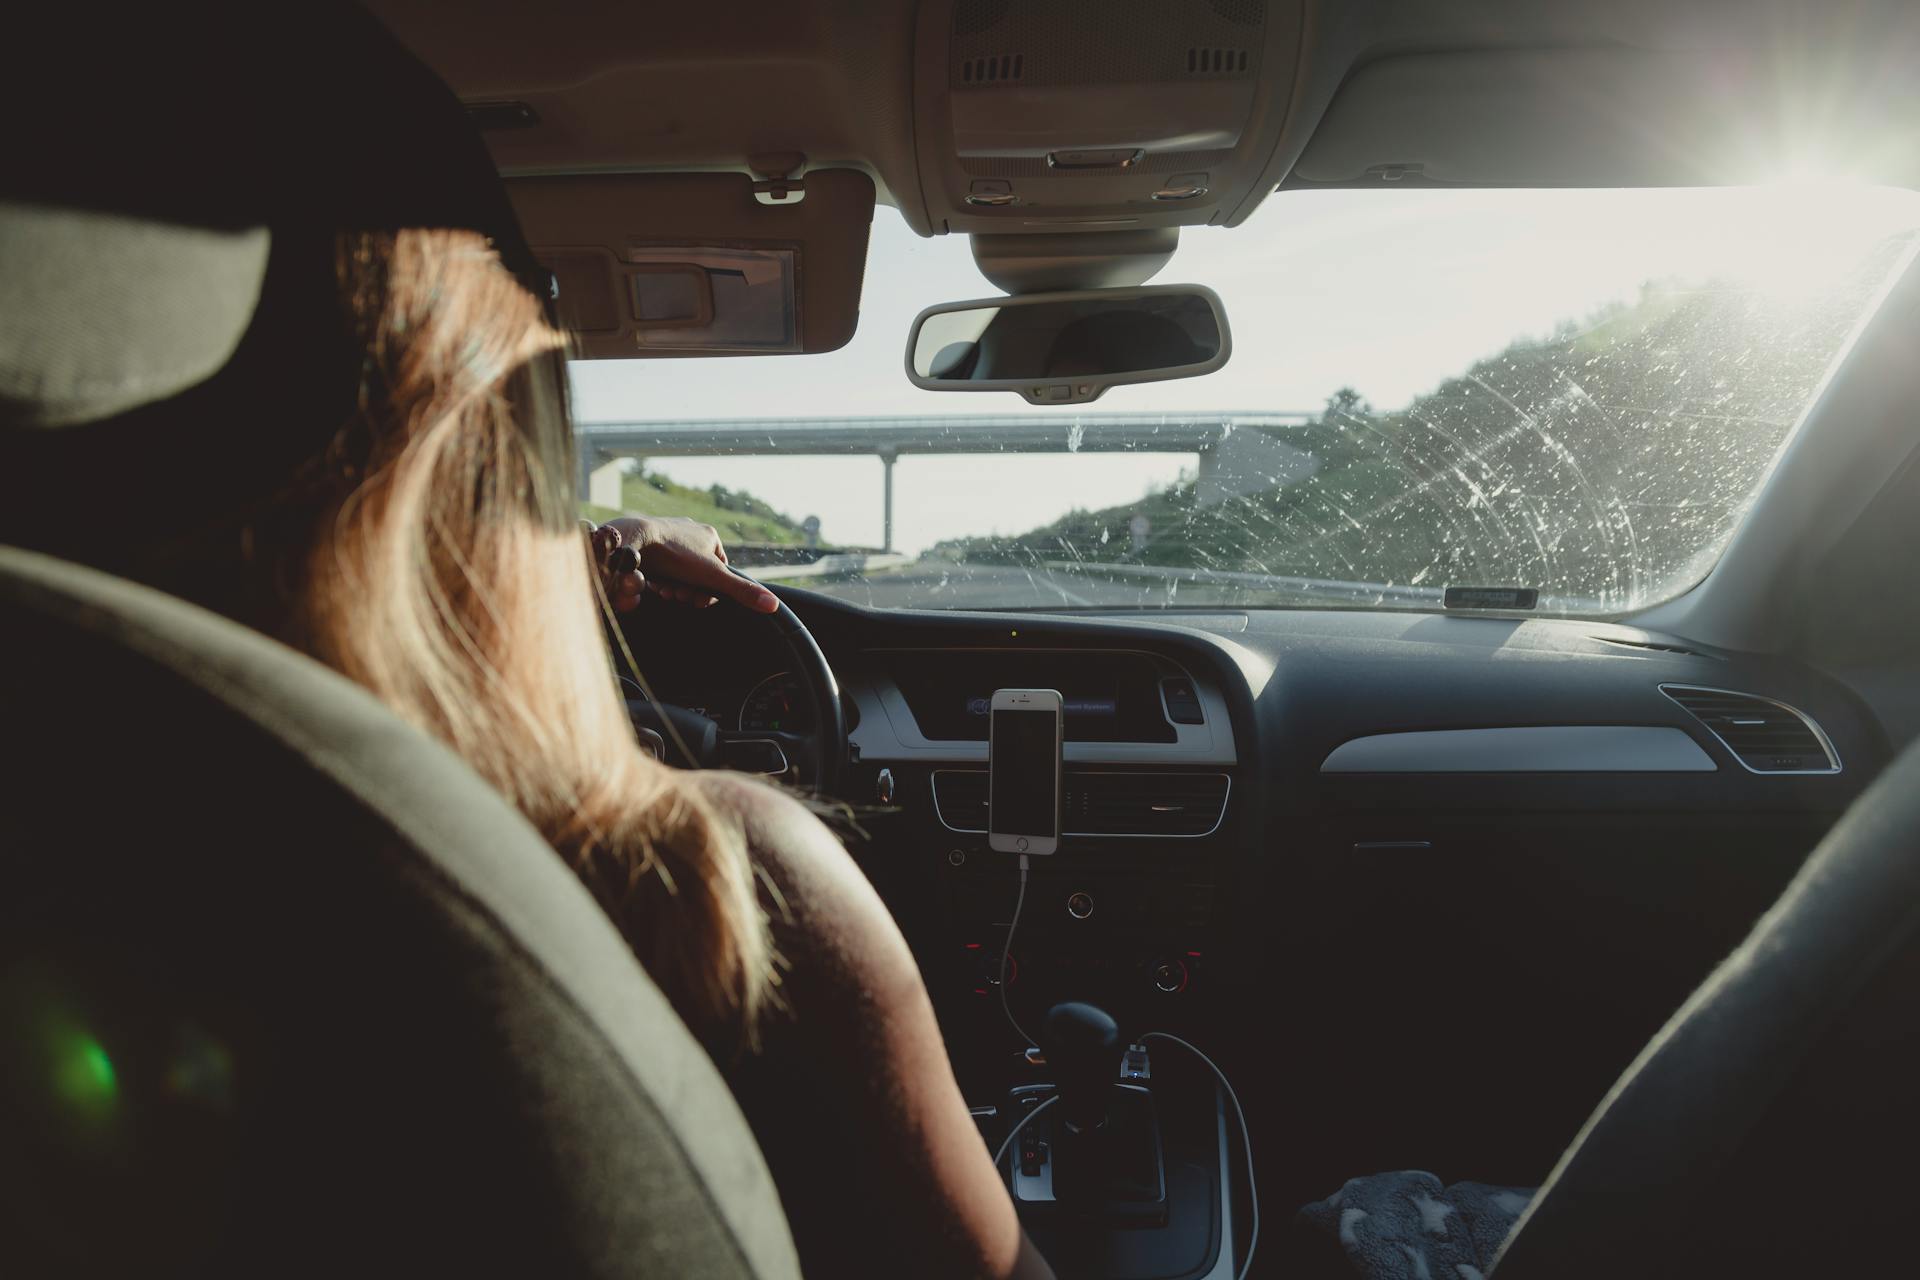 A woman driving. For illustration purposes only  | Source: Pexels